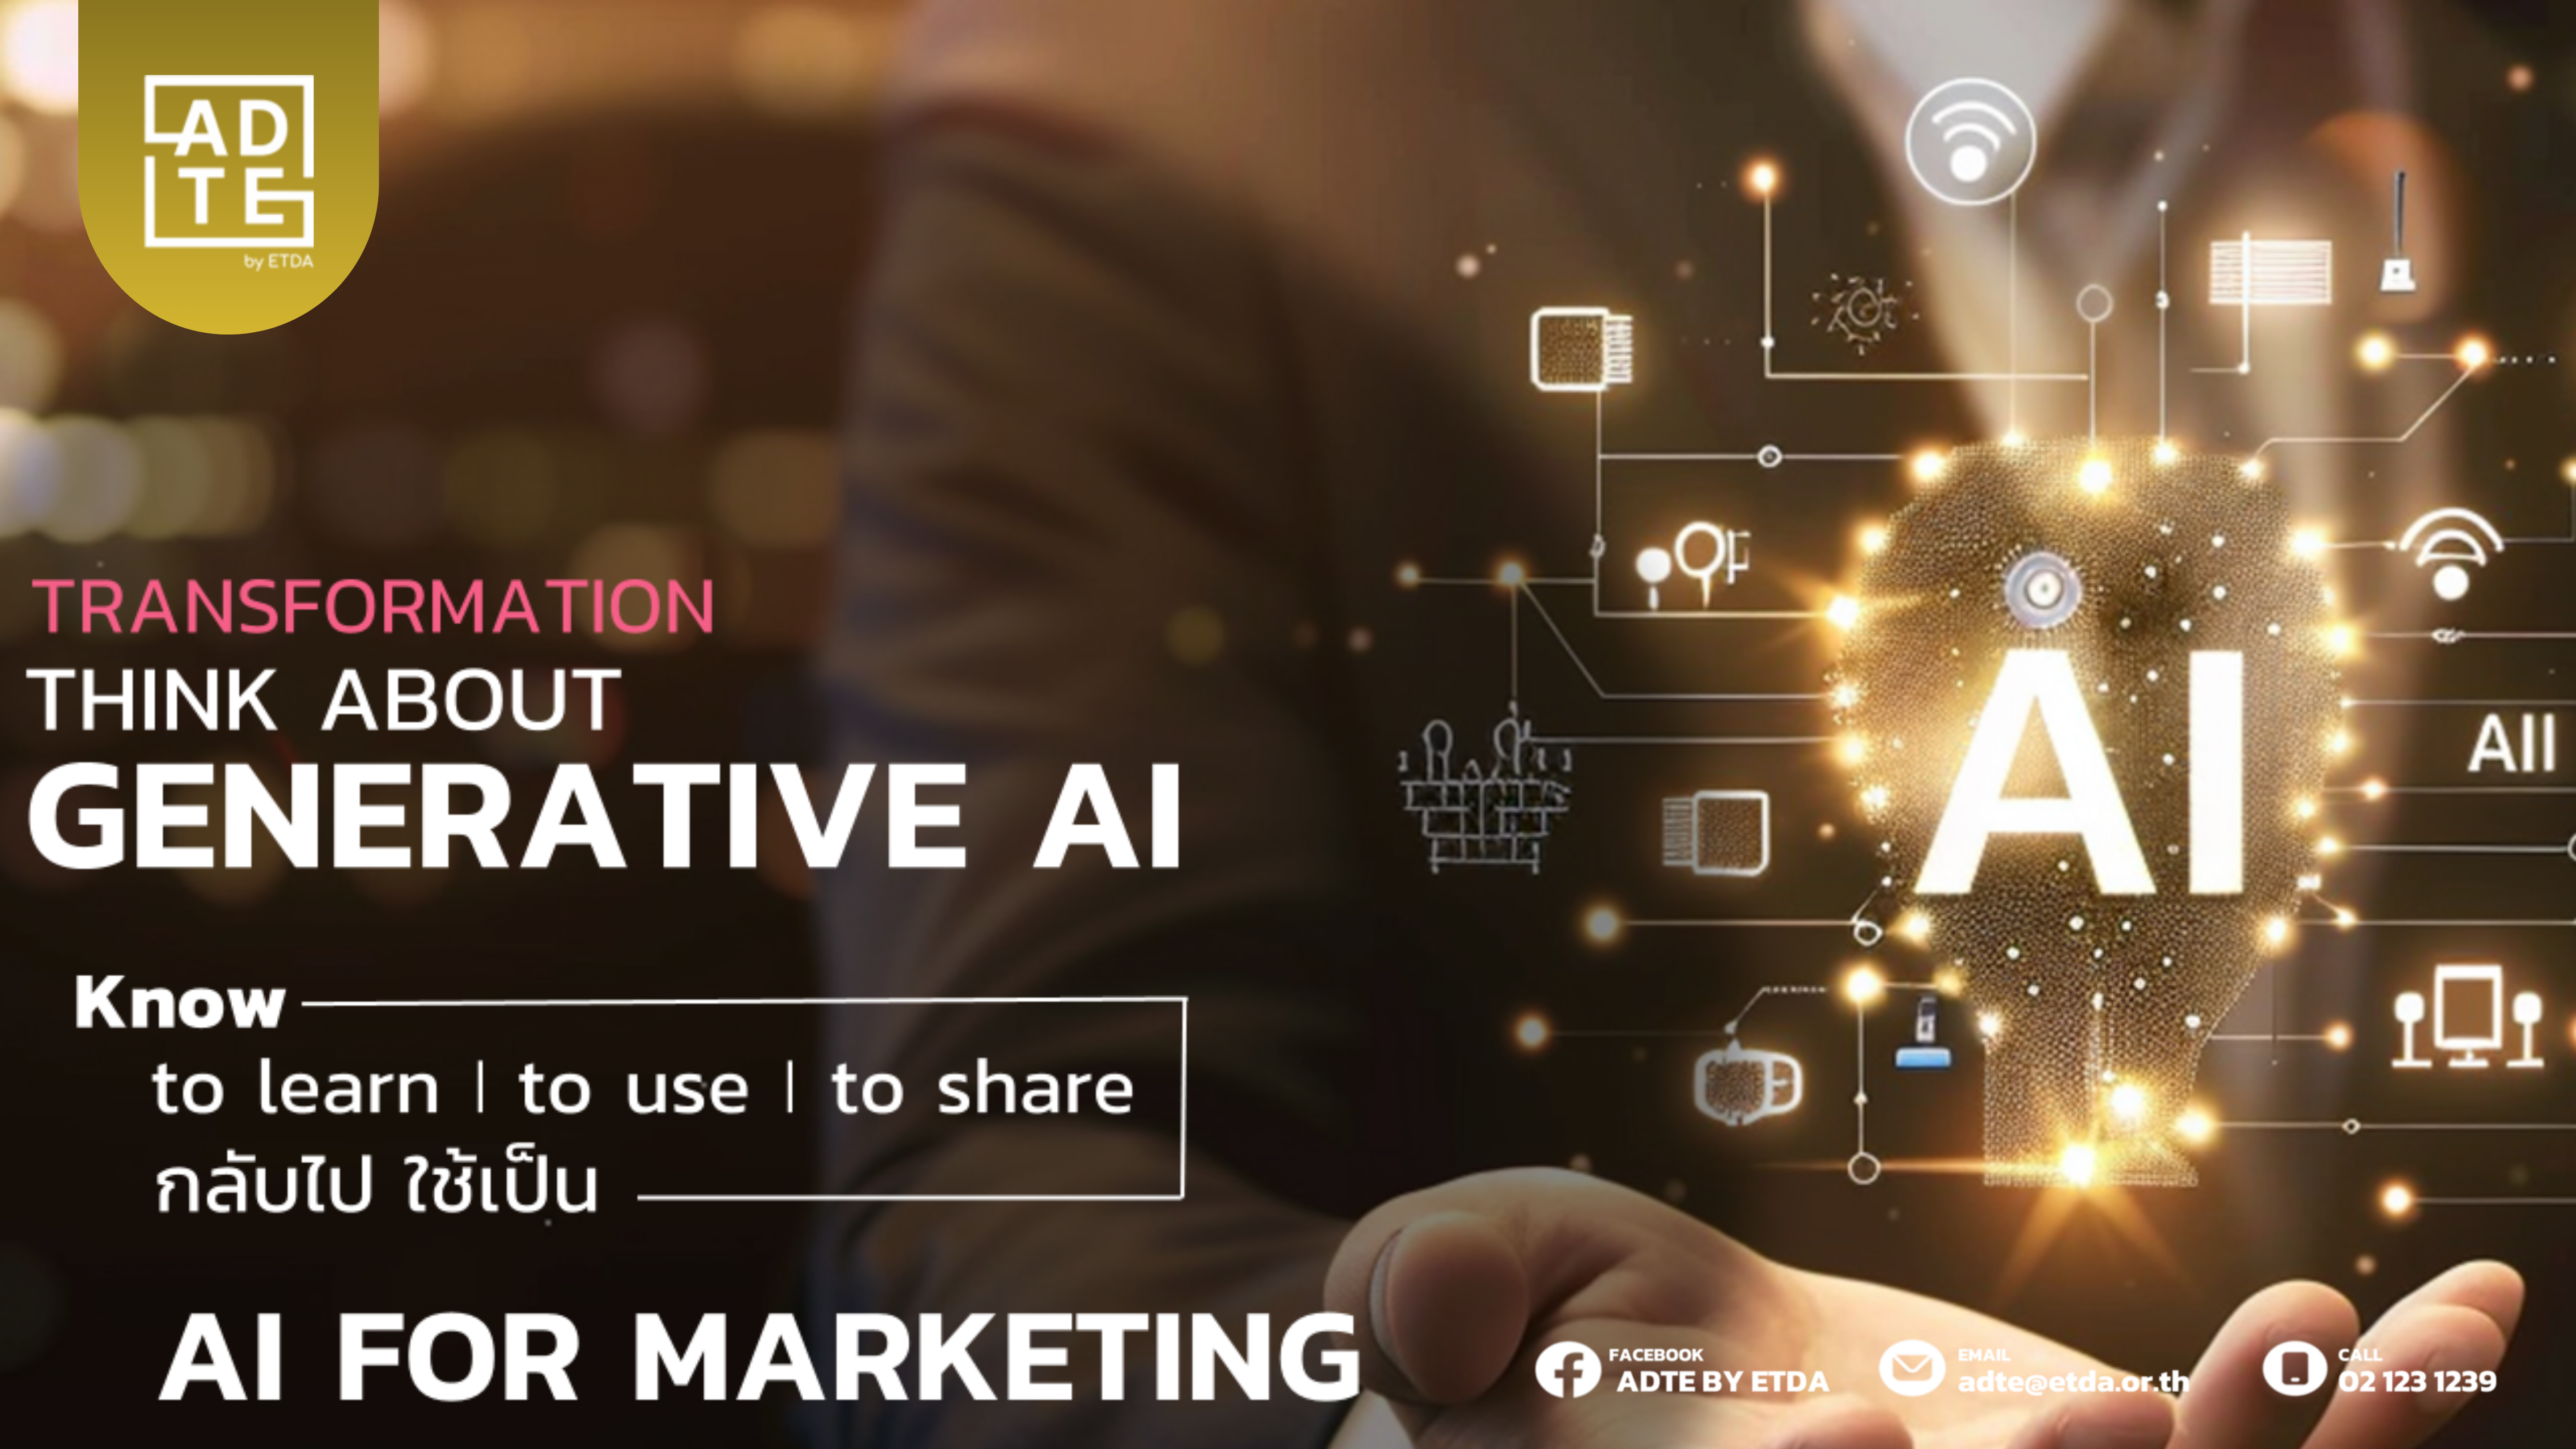 Transformation: Think about Generative AI for Marketing 